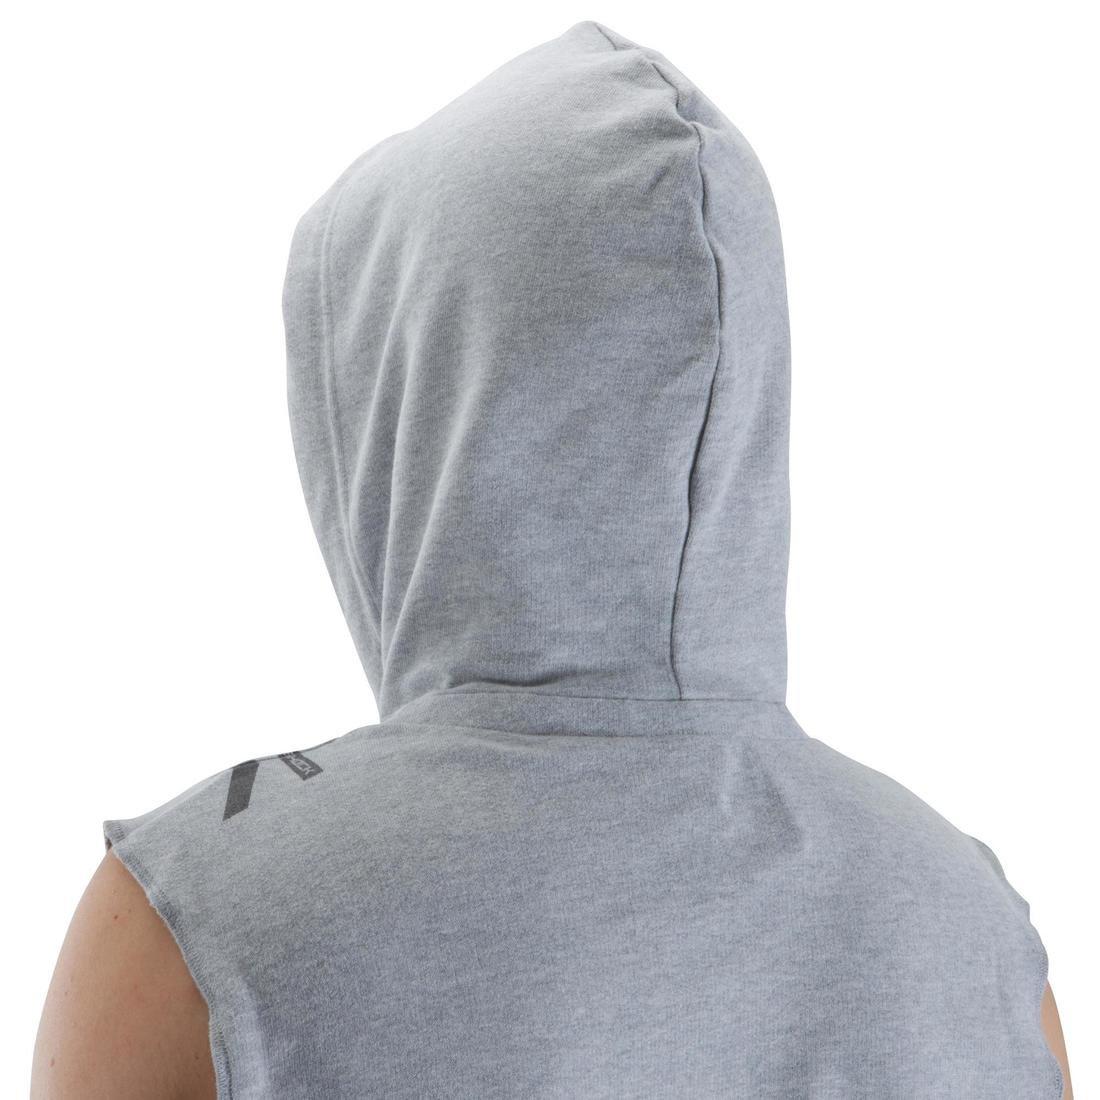 OUTSHOCK - Boxing Hooded Tank Top, Light Grey